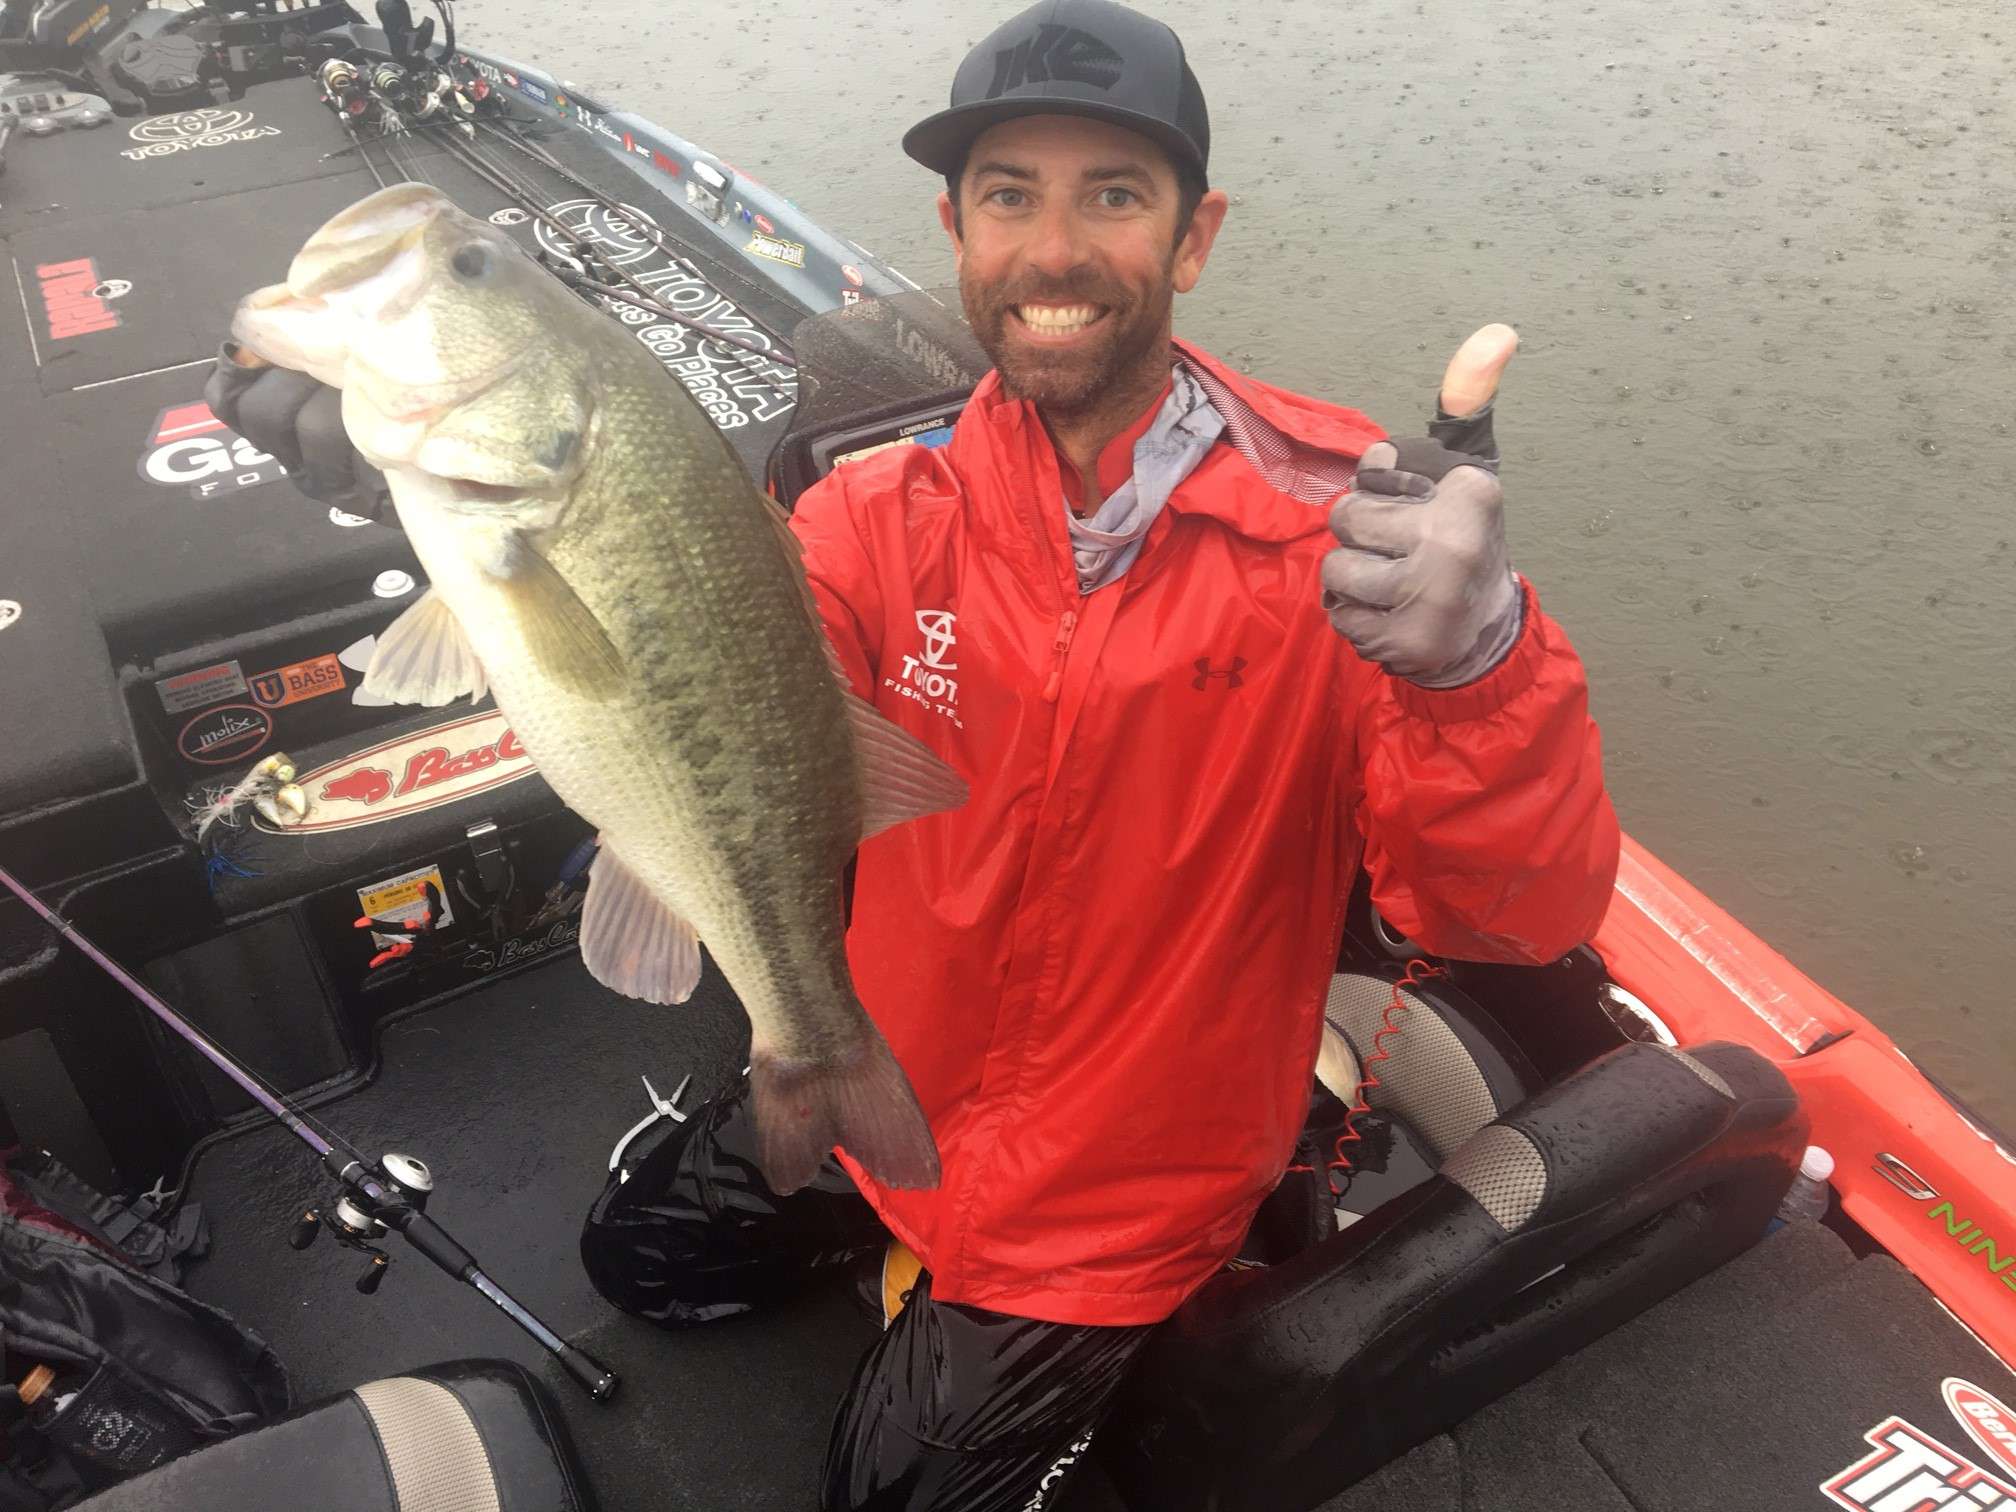 Mike Iaconelli added a four.
